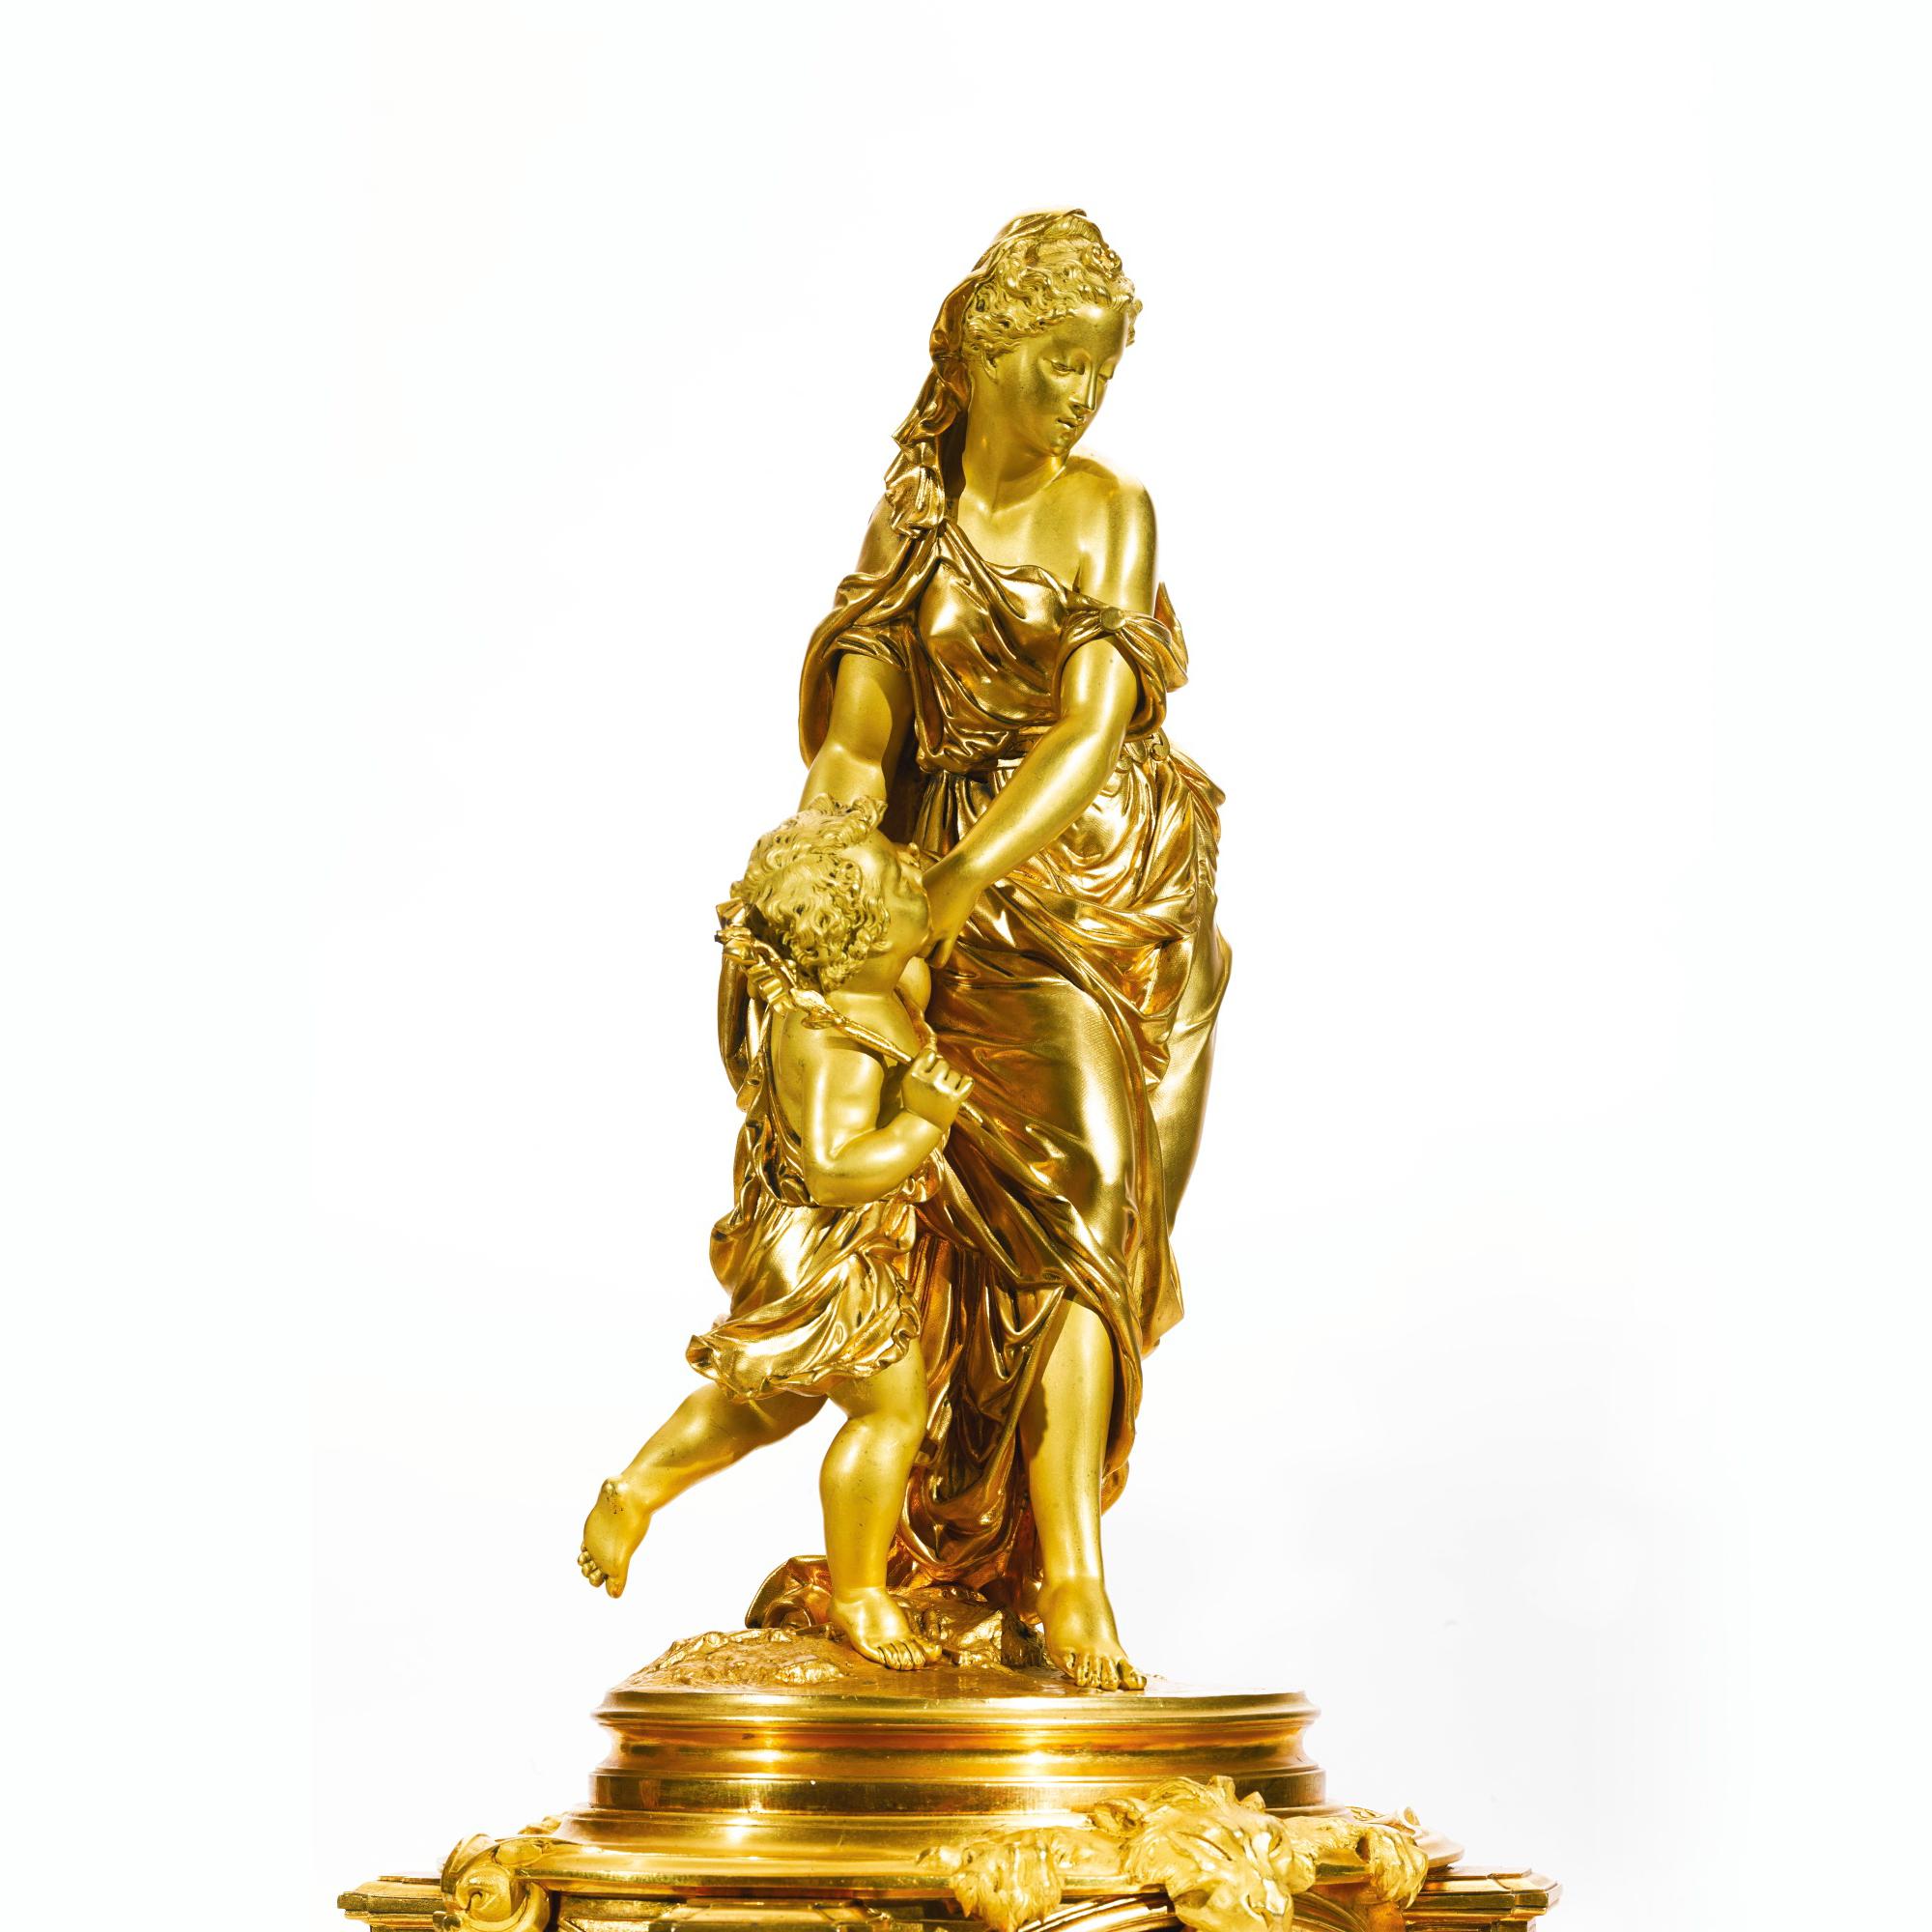 French Neoclassical Style Gilt-Bronze Mantel Clock